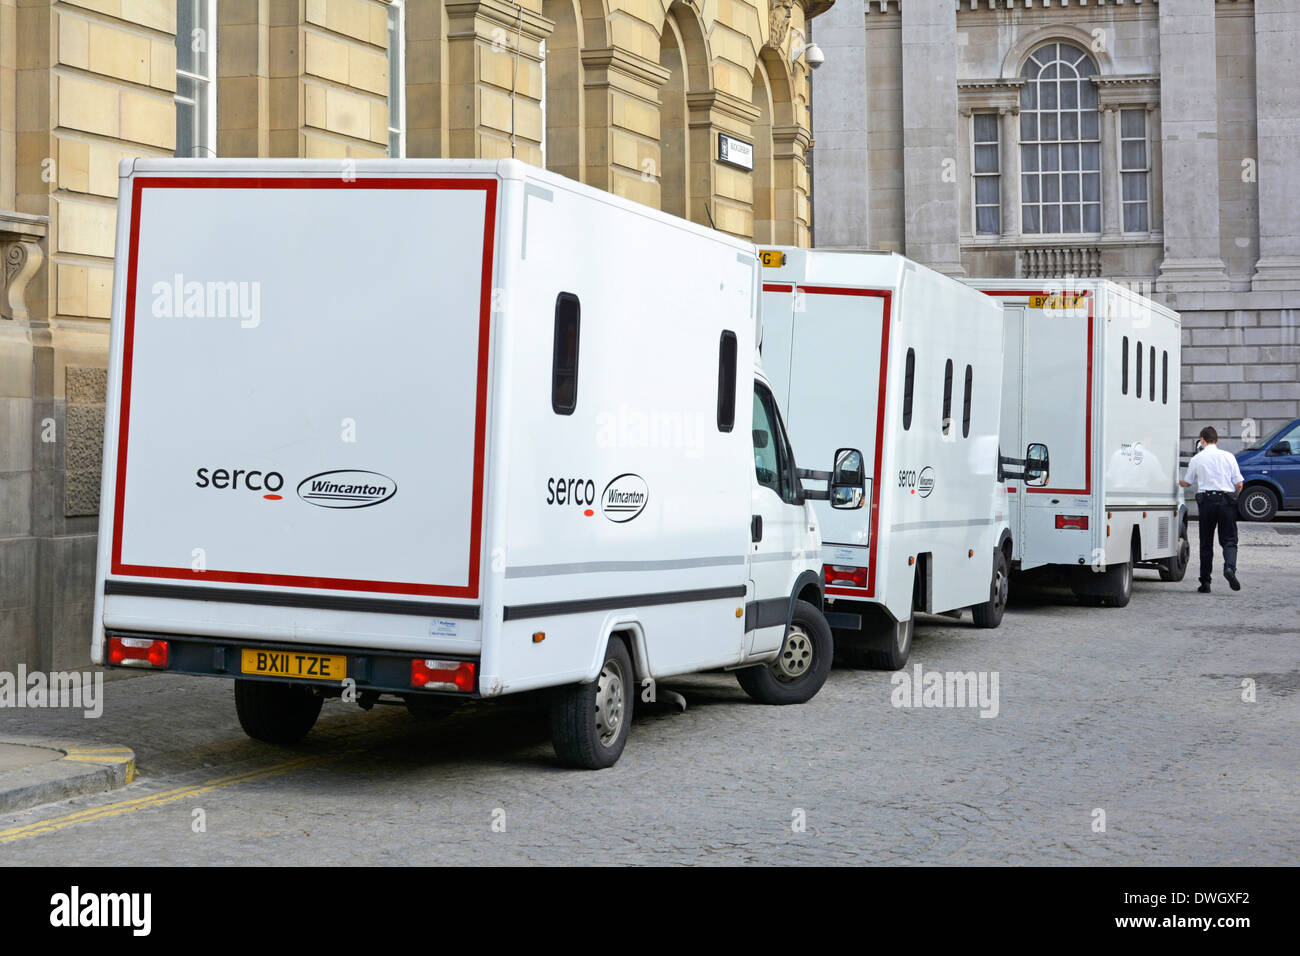 Three joint venture white Serco (outsourcing business) & Wincanton prisoner vans parked outside rear of City of London Magistrates Court England UK Stock Photo